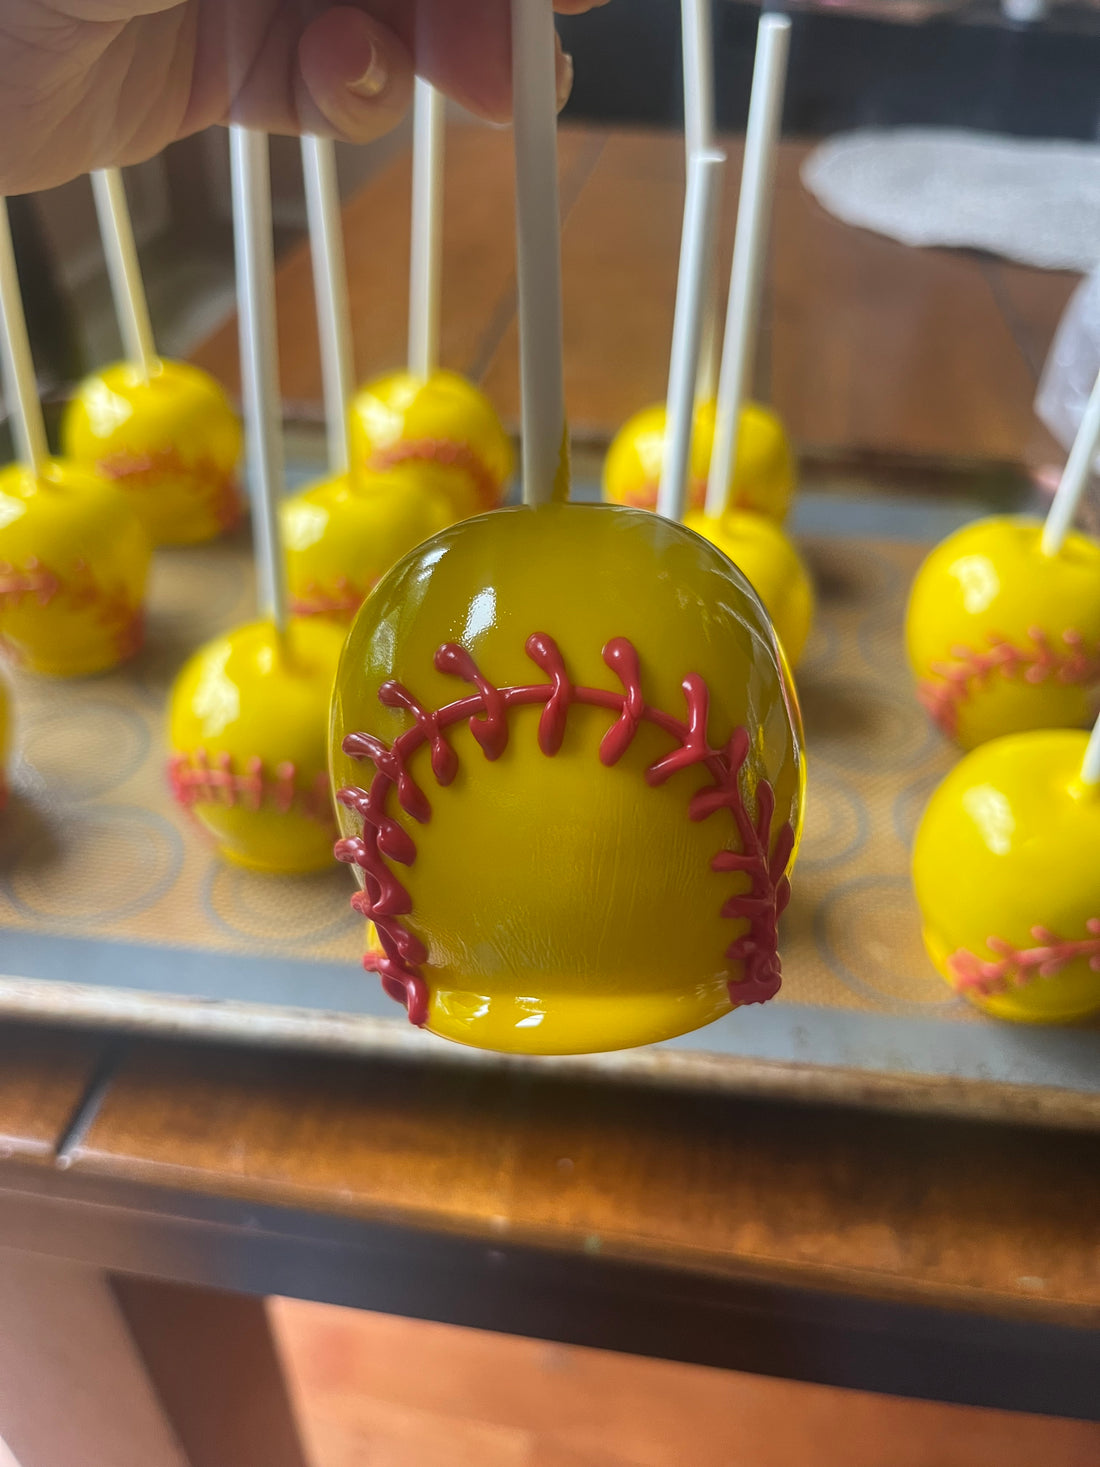 Making Candy Apples That Look Like Softballs: A Post-Game Treat for Your Softball Team